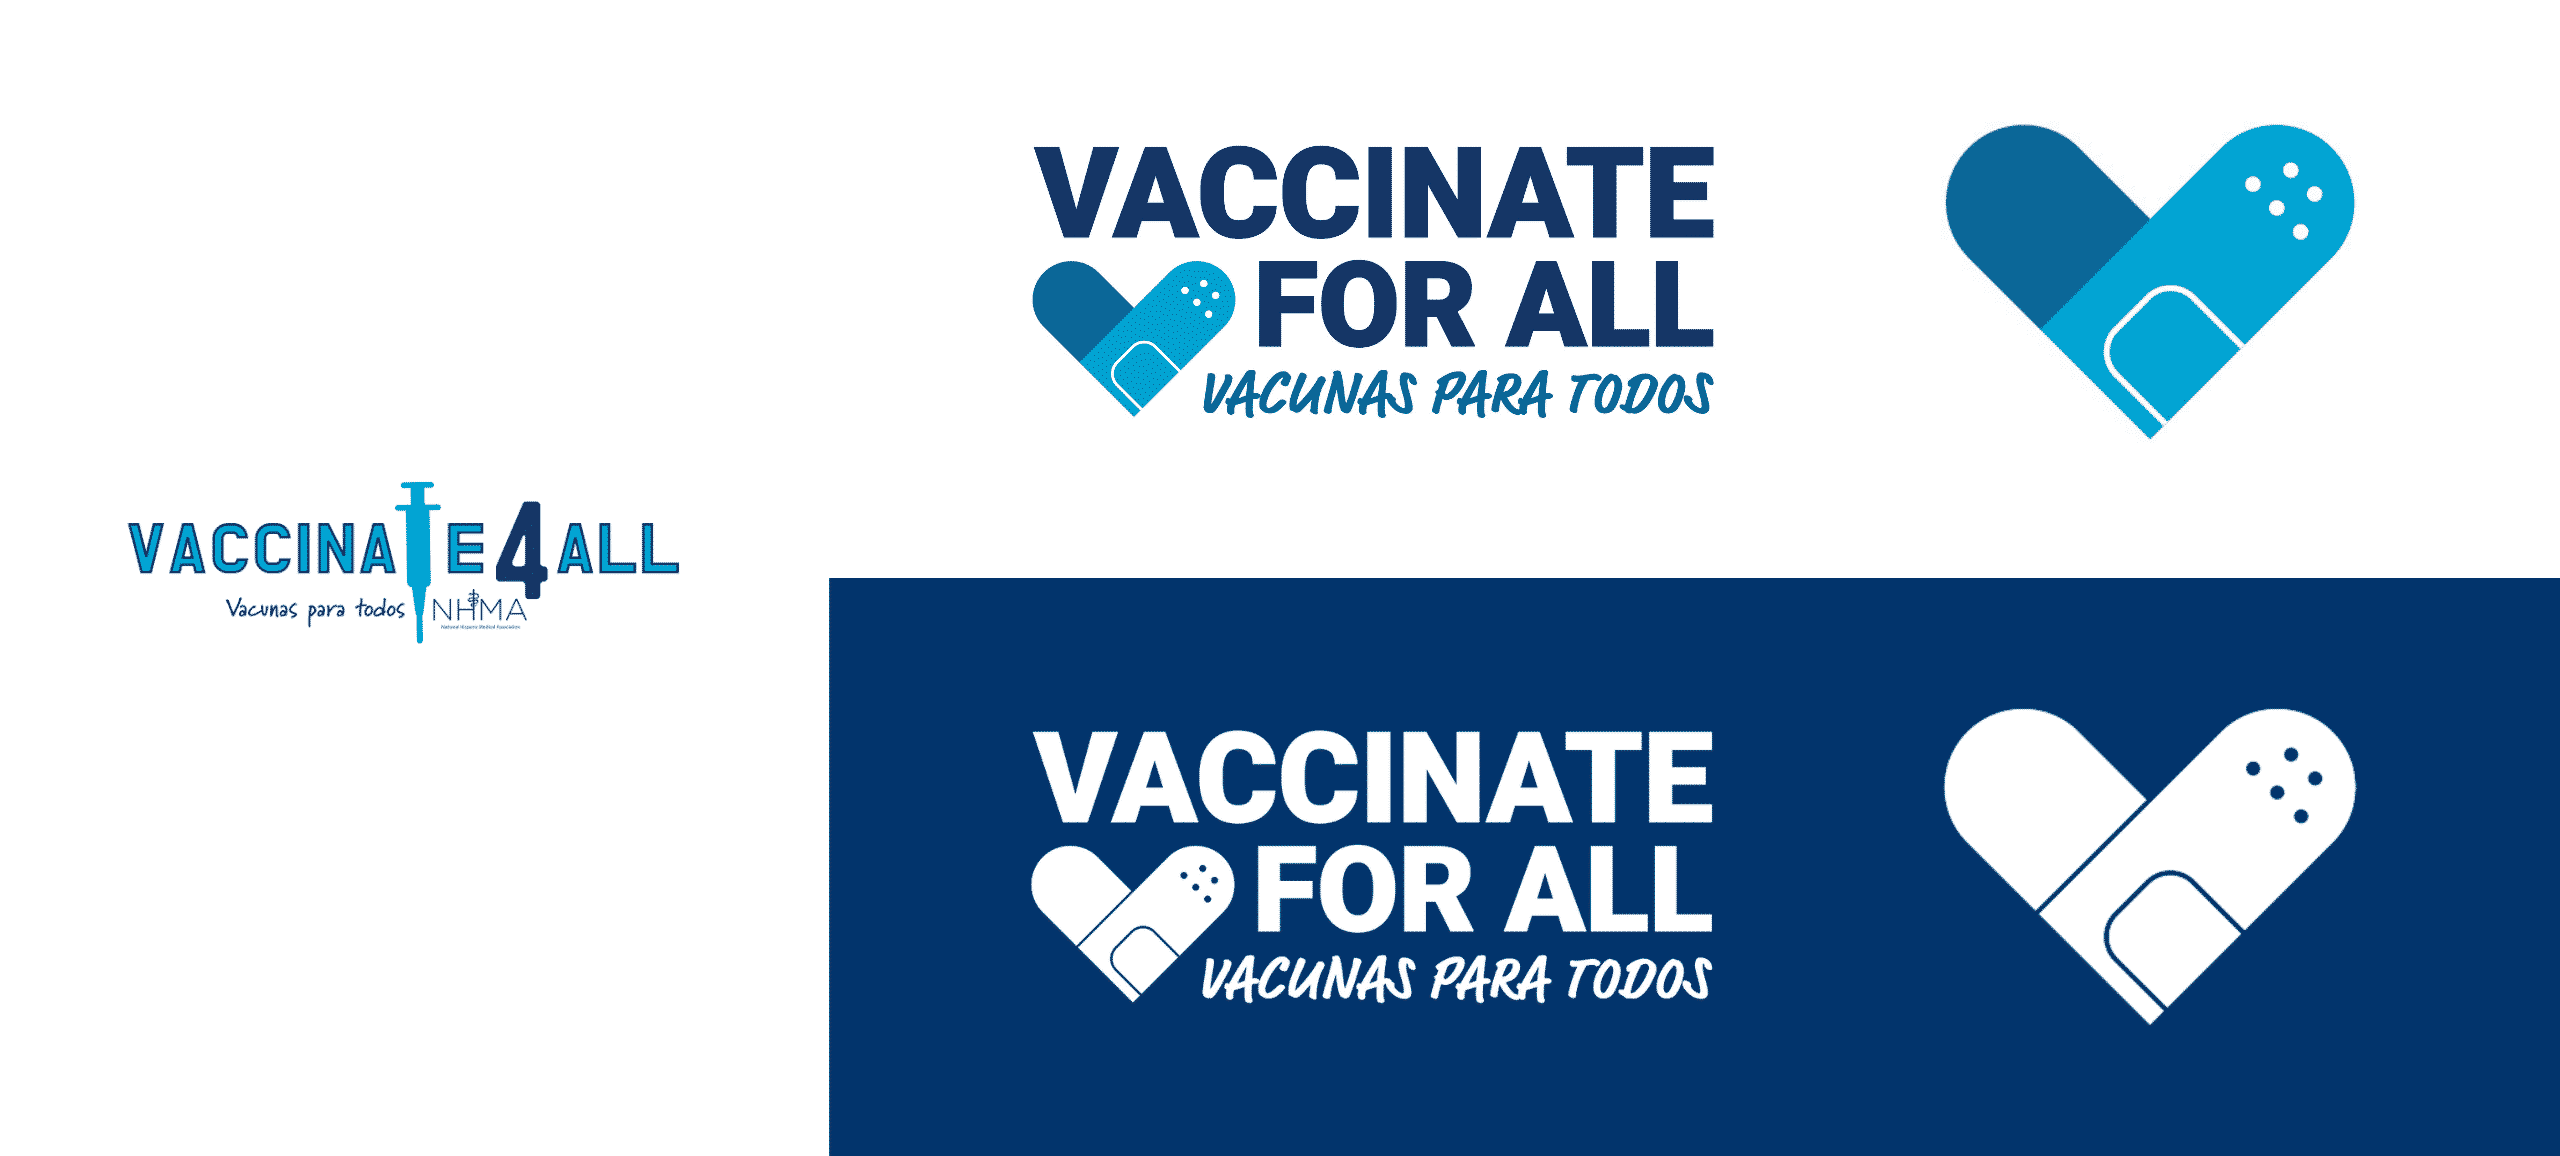 http://VACCINATE%20FOR%20ALL%20LOGO